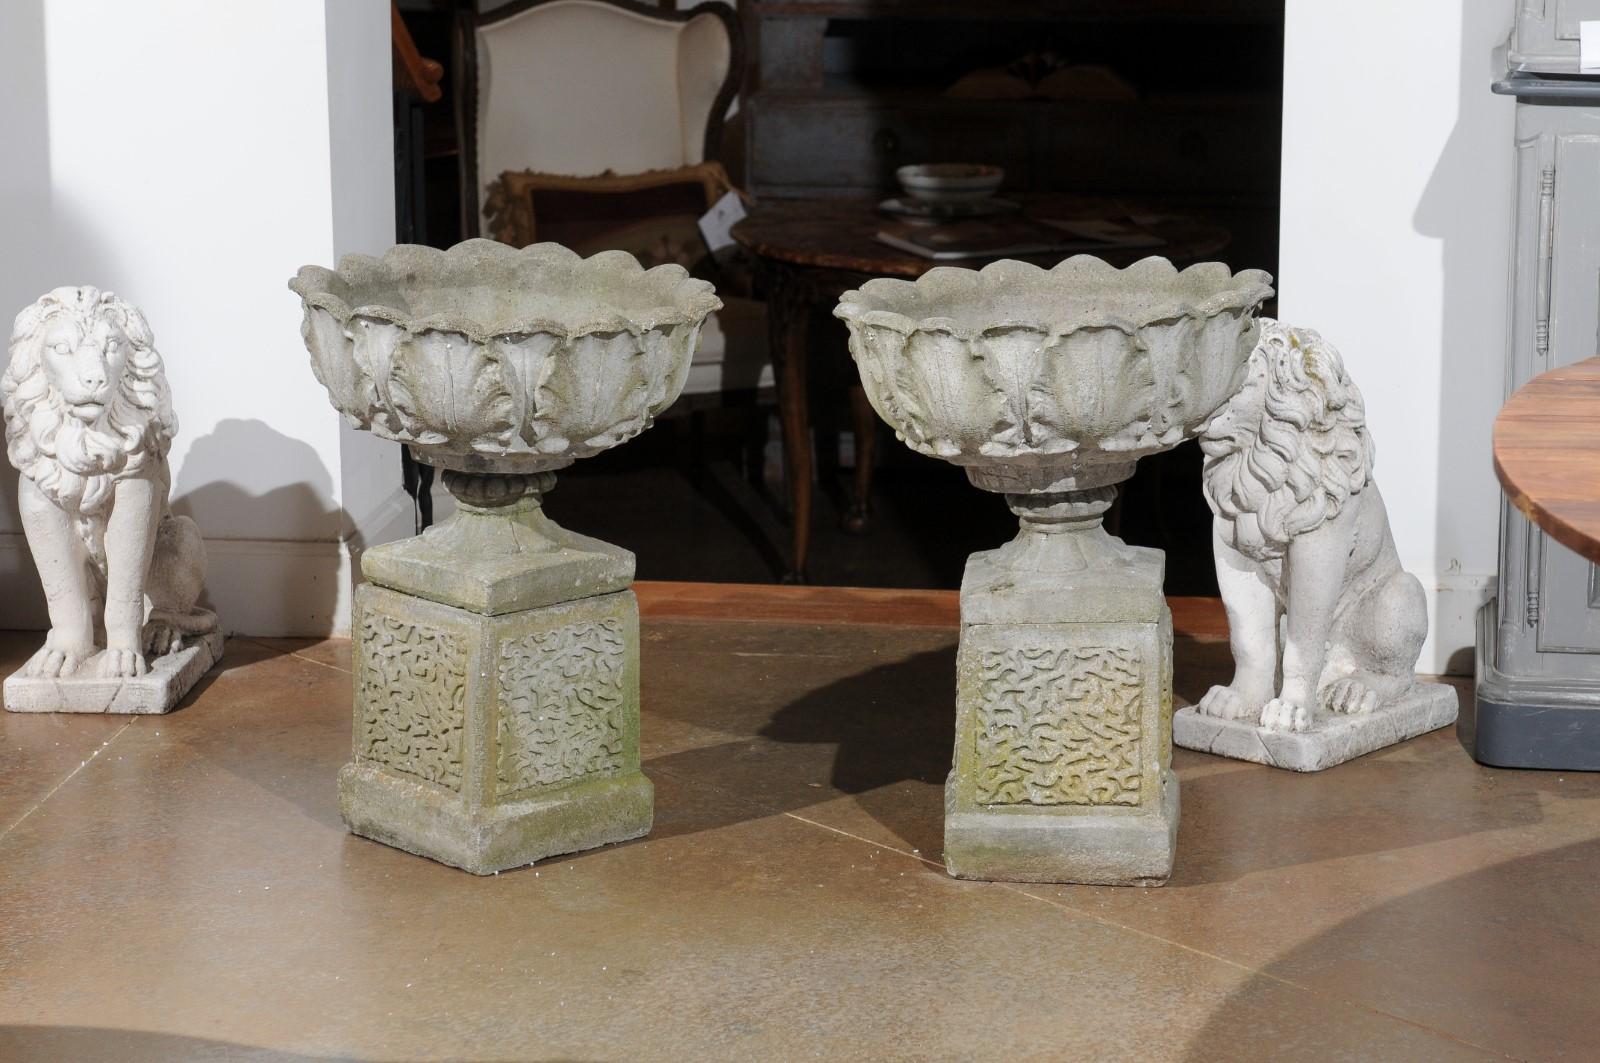 A pair of English carved stone urns on pedestals from the 20th century, with acanthus leaf motifs. Created in England during the 20th century, each of this pair of stone urns captures our attention with its elegant rhythm of acanthus leaves adorning